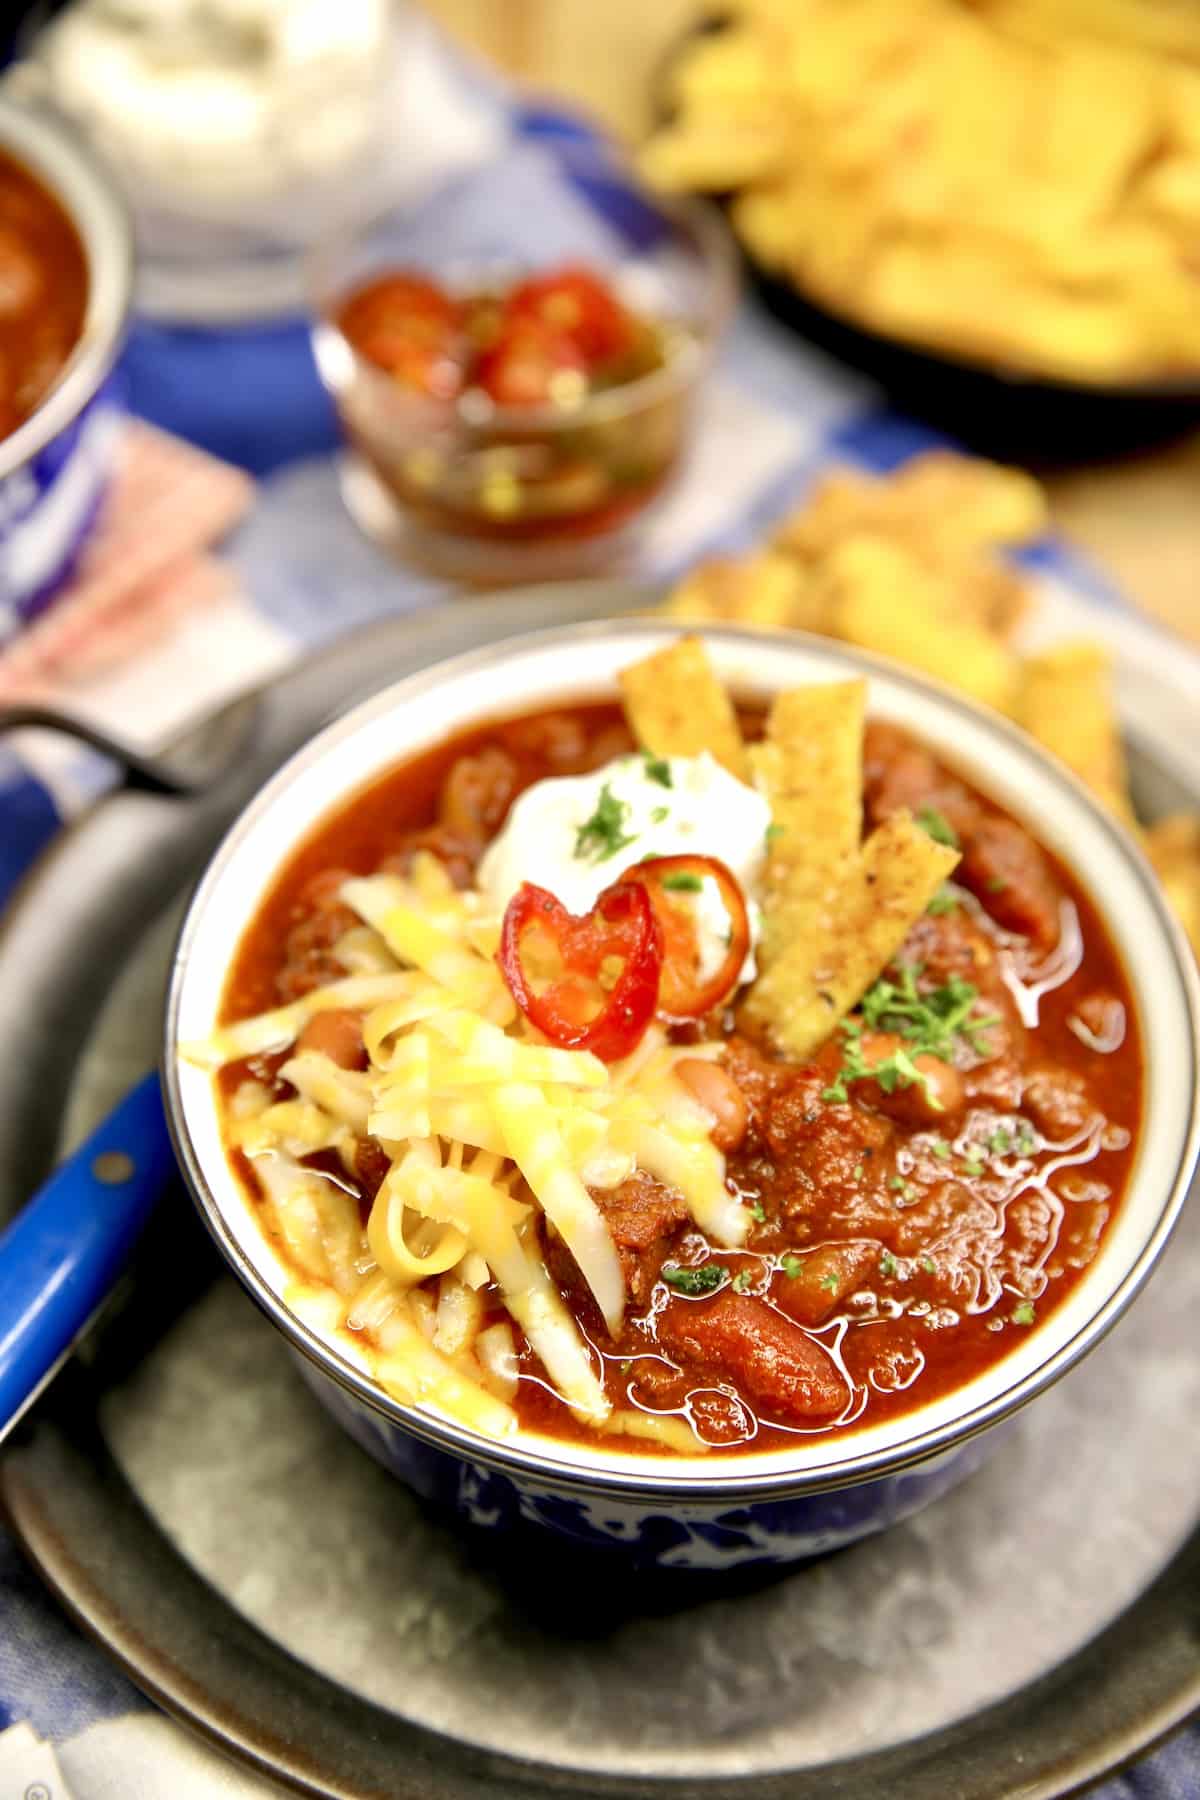 Bowl of chili with fritos, cheese, jalapenos and sour cream.